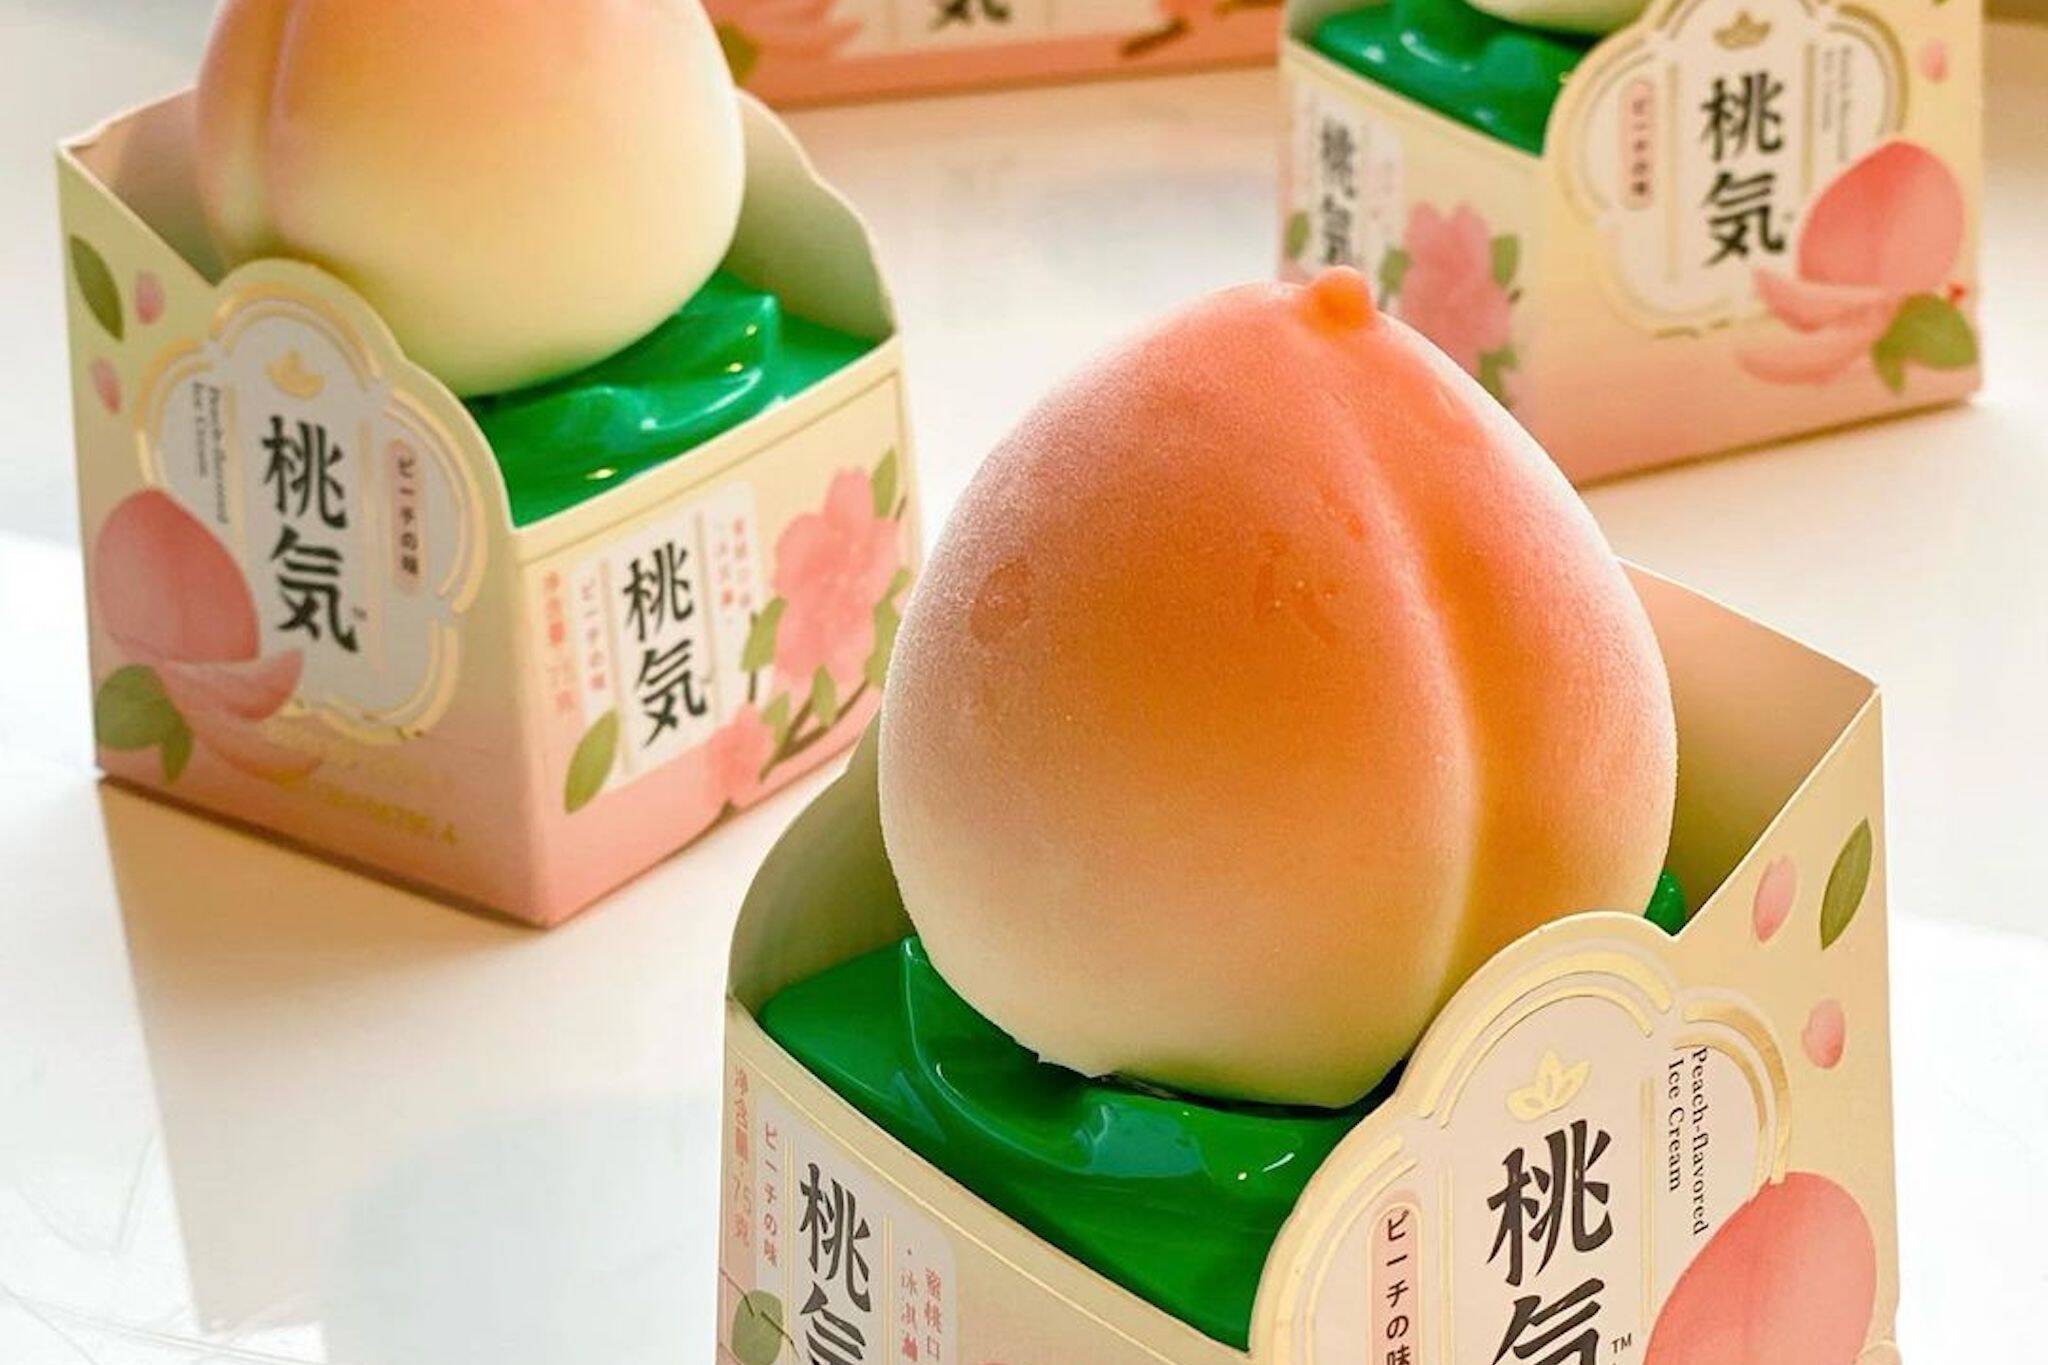 This peach ice cream is going viral and here's where to get it in Toronto